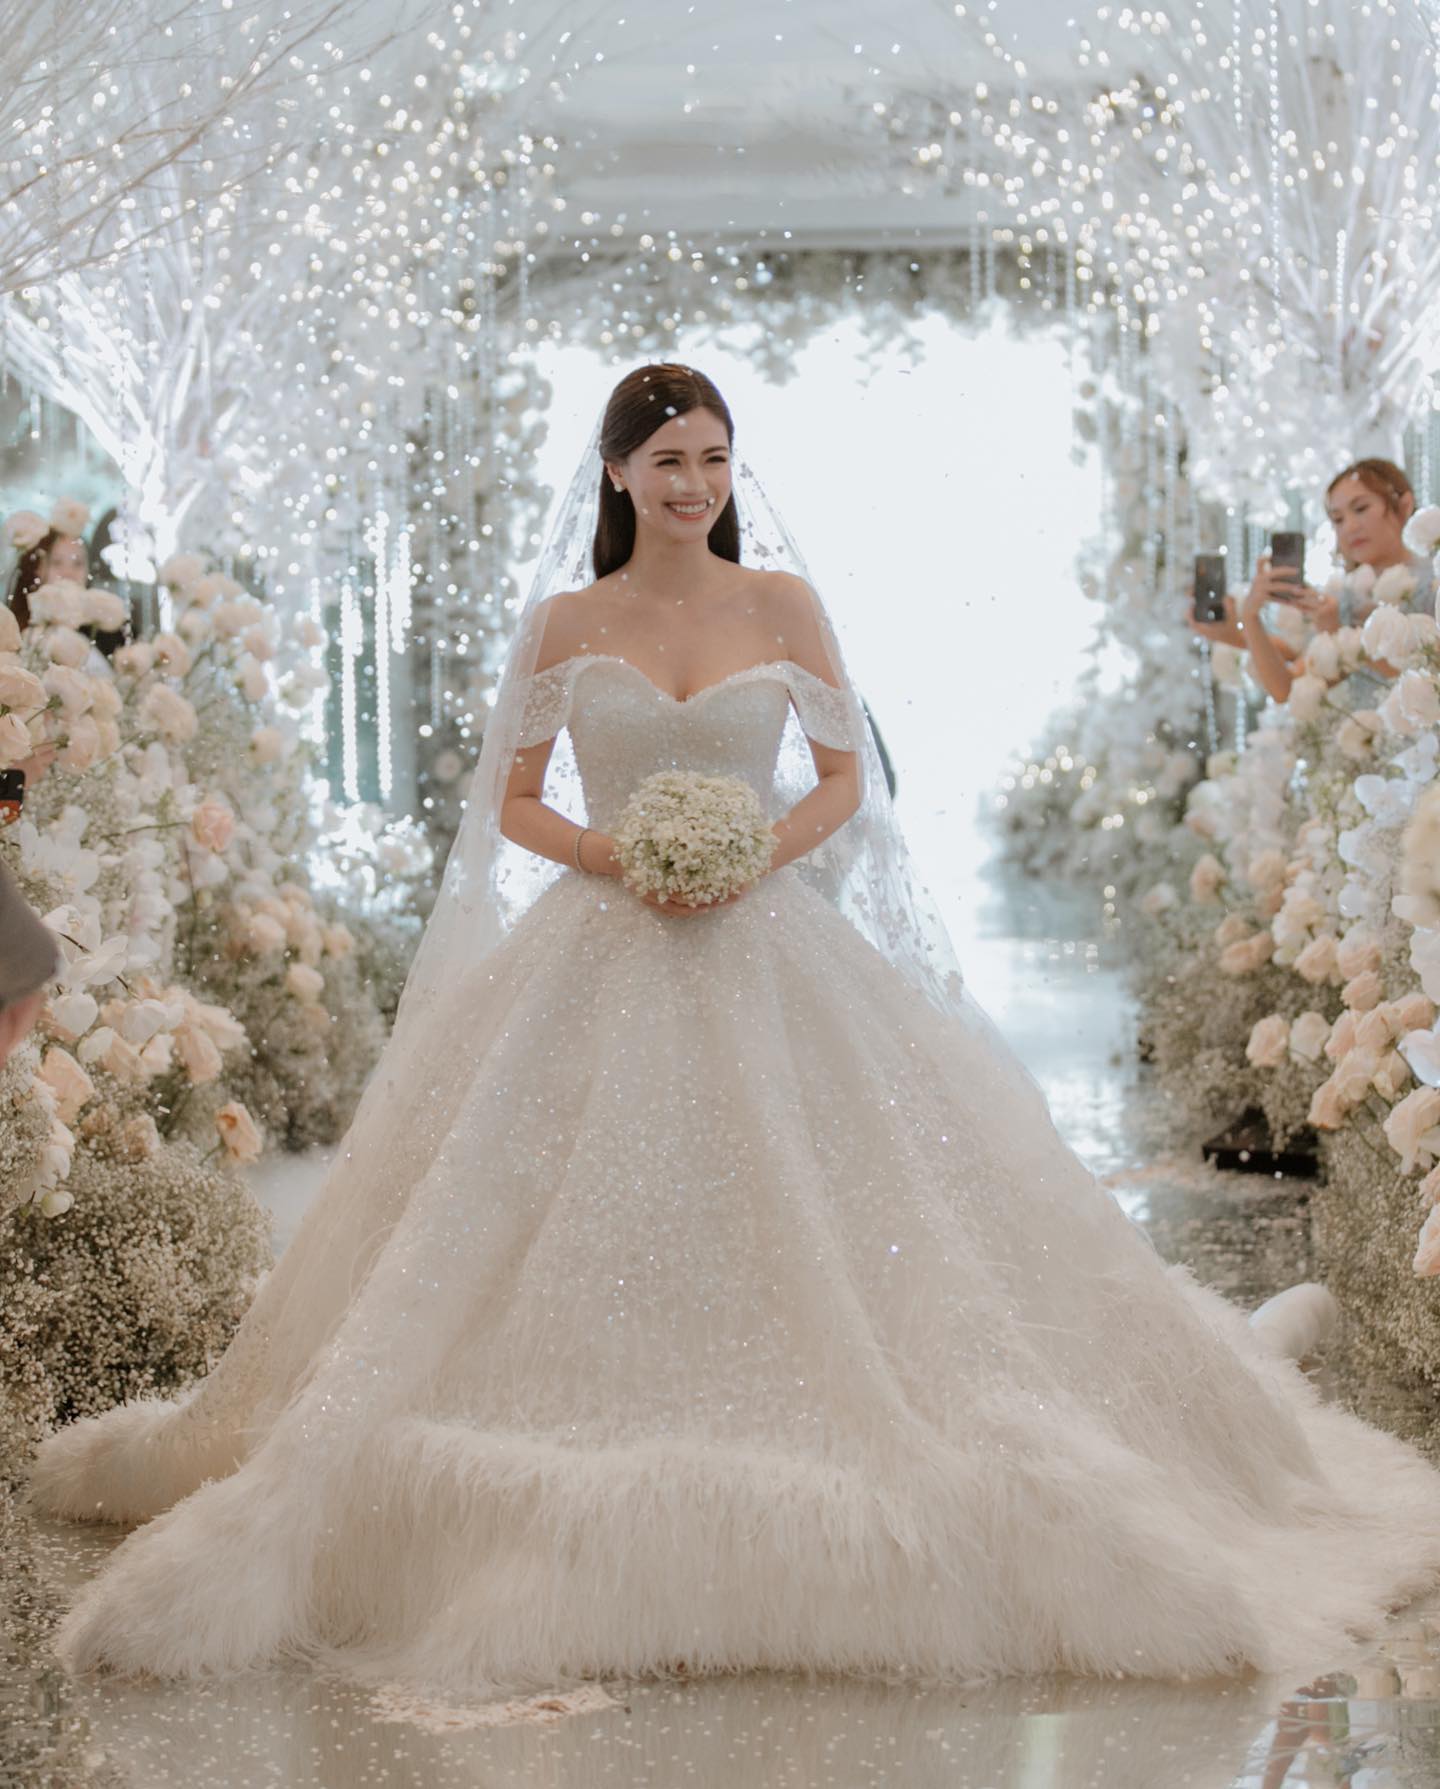 Verniece Enciso glows in intricate Michael Cinco bridal gown